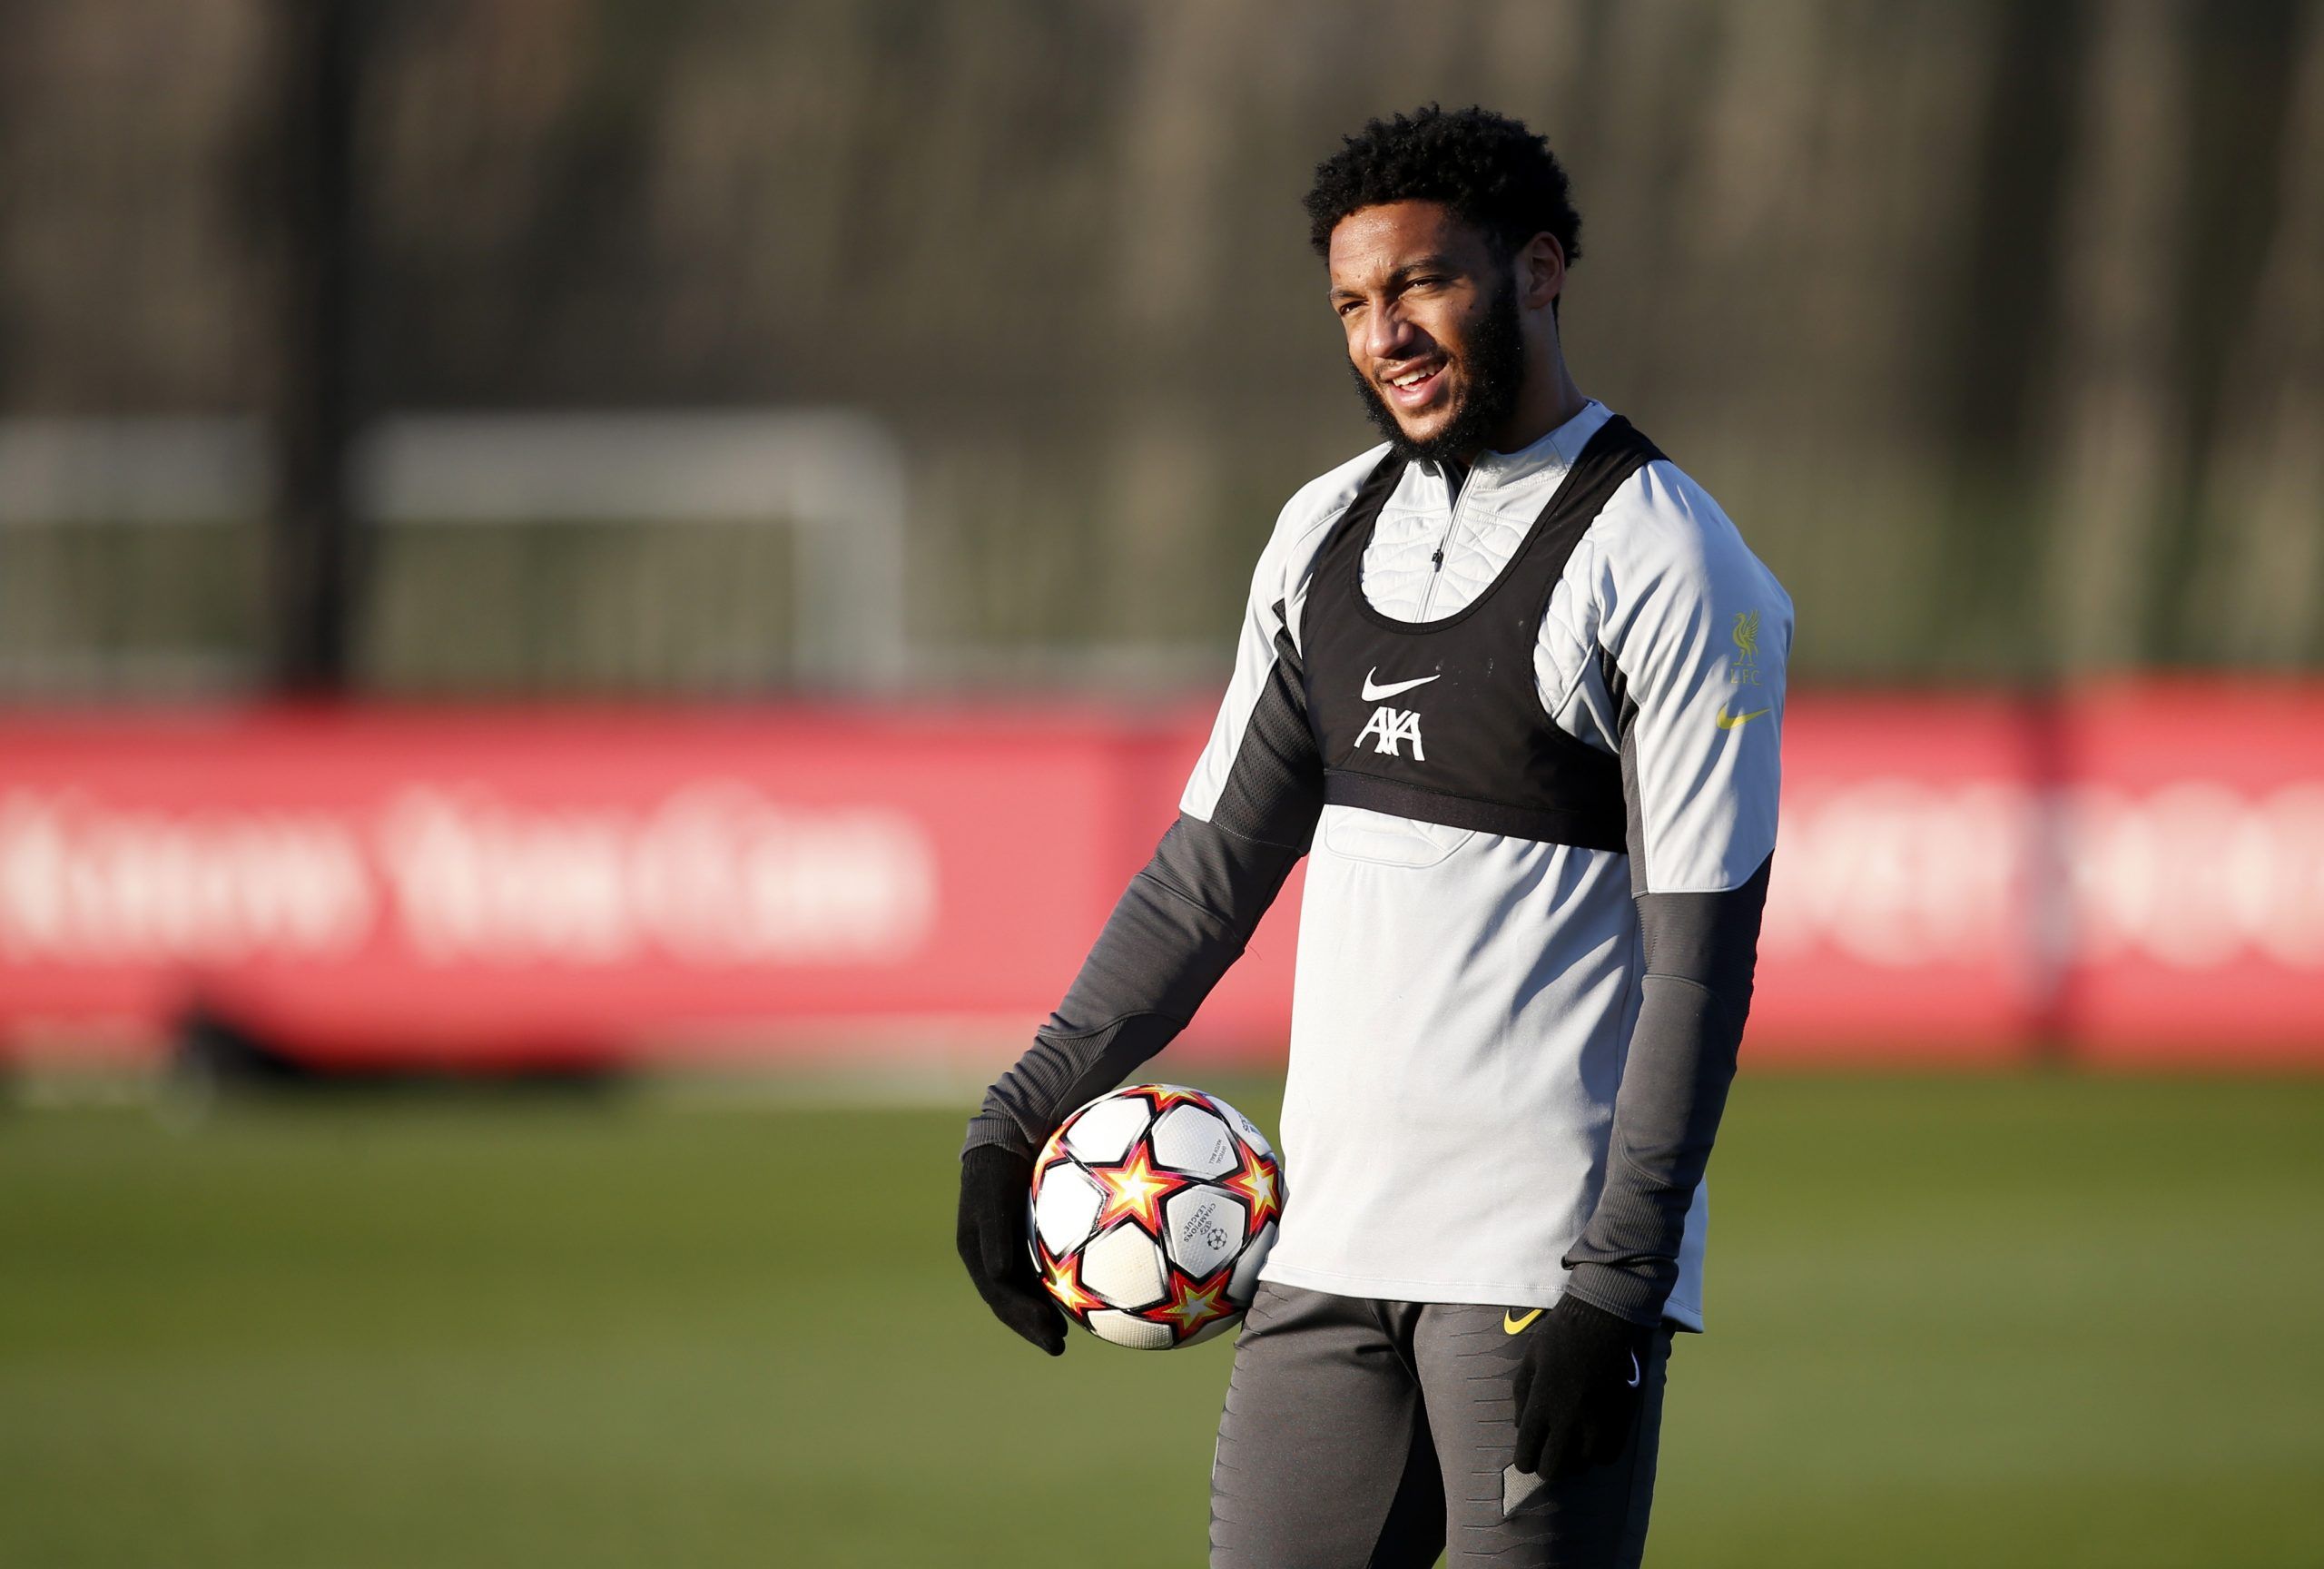 Soccer Football - Champions League - Liverpool Training - AXA Training Centre, Liverpool, Britain - March 7, 2022 Liverpool's Joe Gomez during training Action Images via Reuters/Ed Sykes